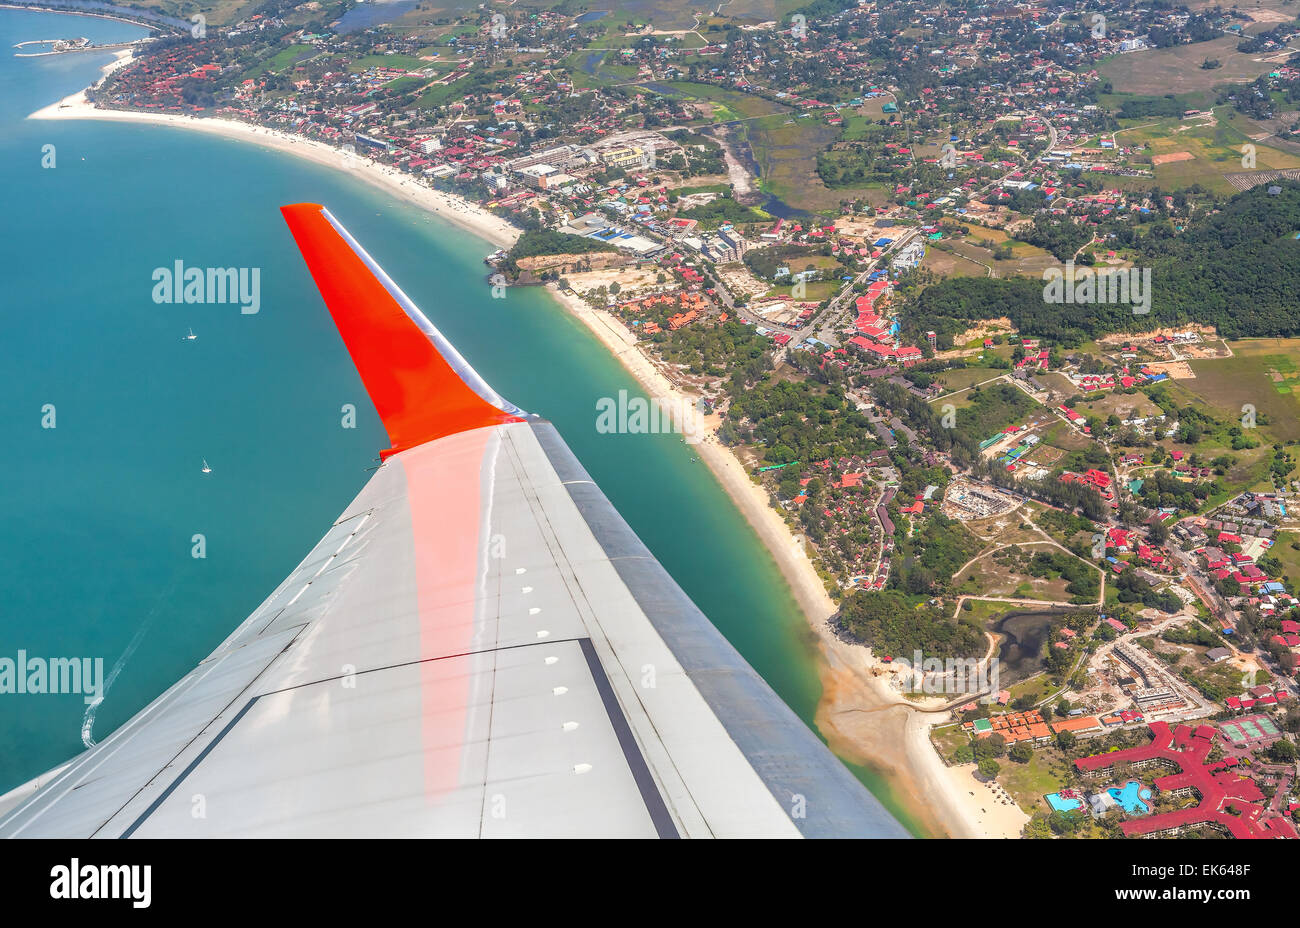 Wing of the plane above Langkawi Island, Malaysia. Stock Photo